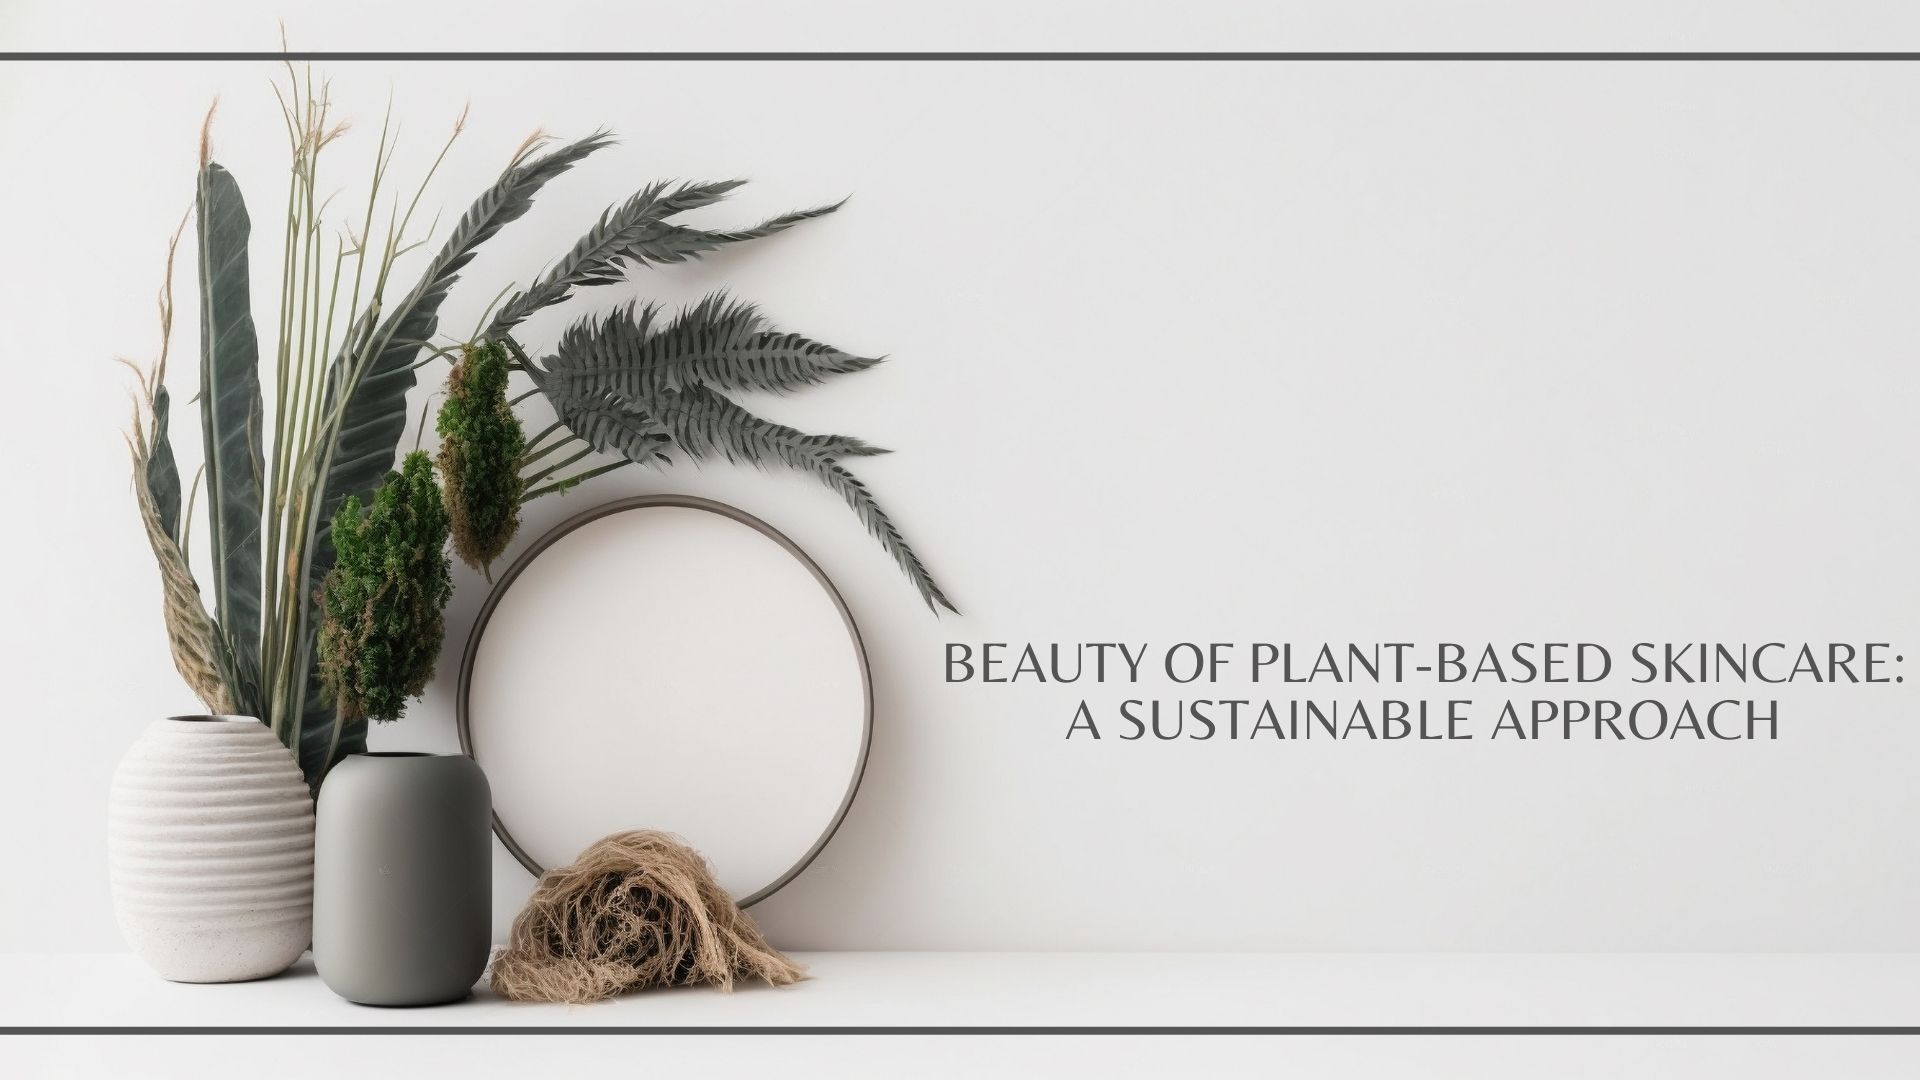 Beauty of Plant-Based Skincare: A Sustainable Approach